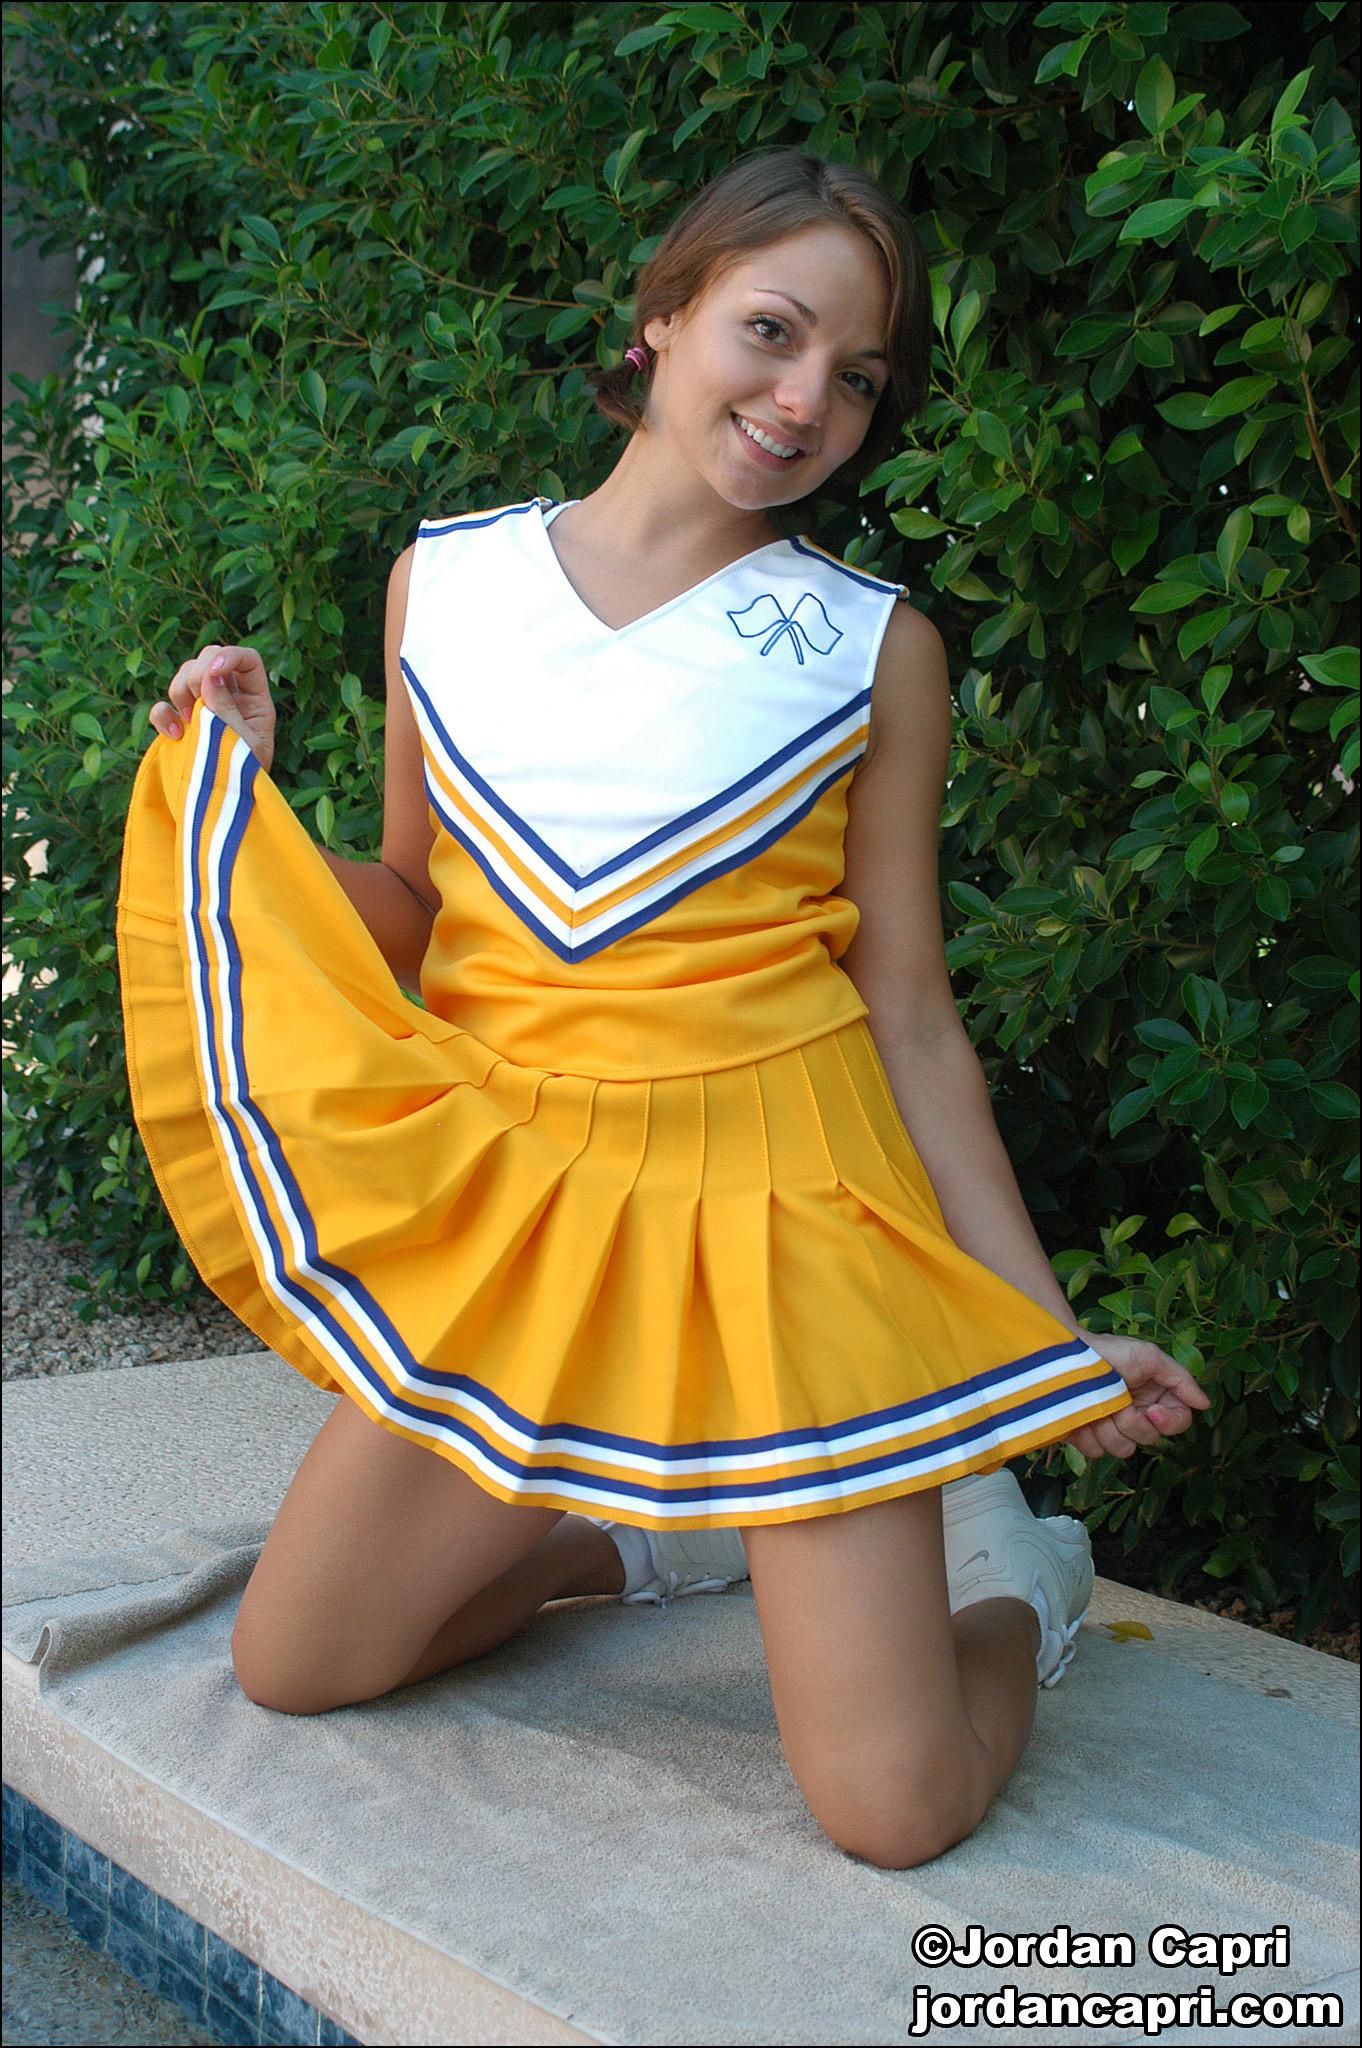 Pictures of teen Jordan Capri cheering for you in the back yard #55599622